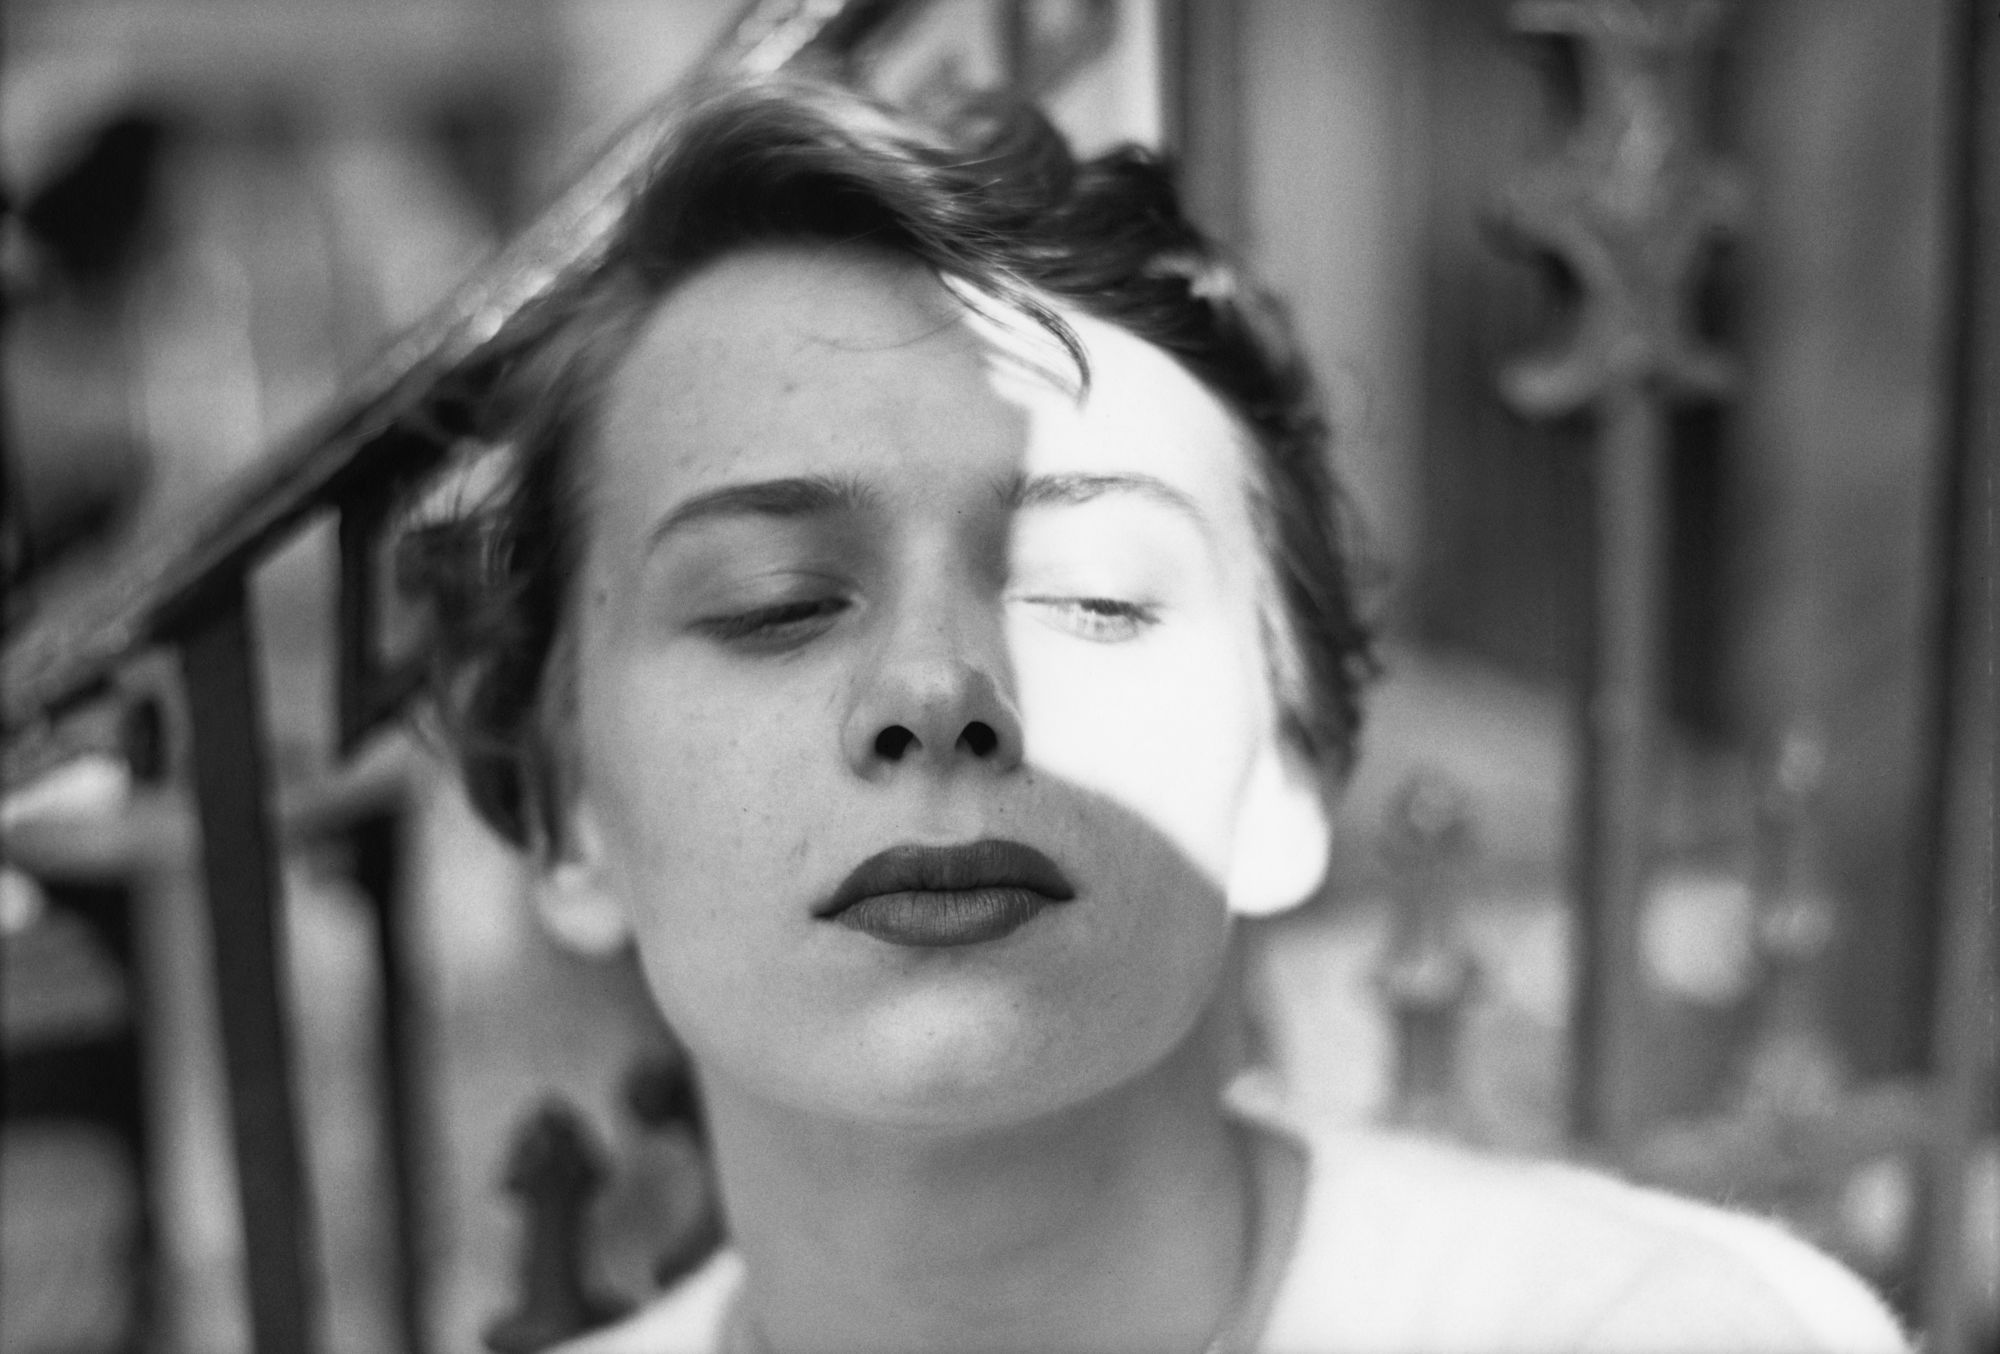 "Ana," taken in the 1950s. Saul Leiter was known for his ability to create a collage within a single frame.